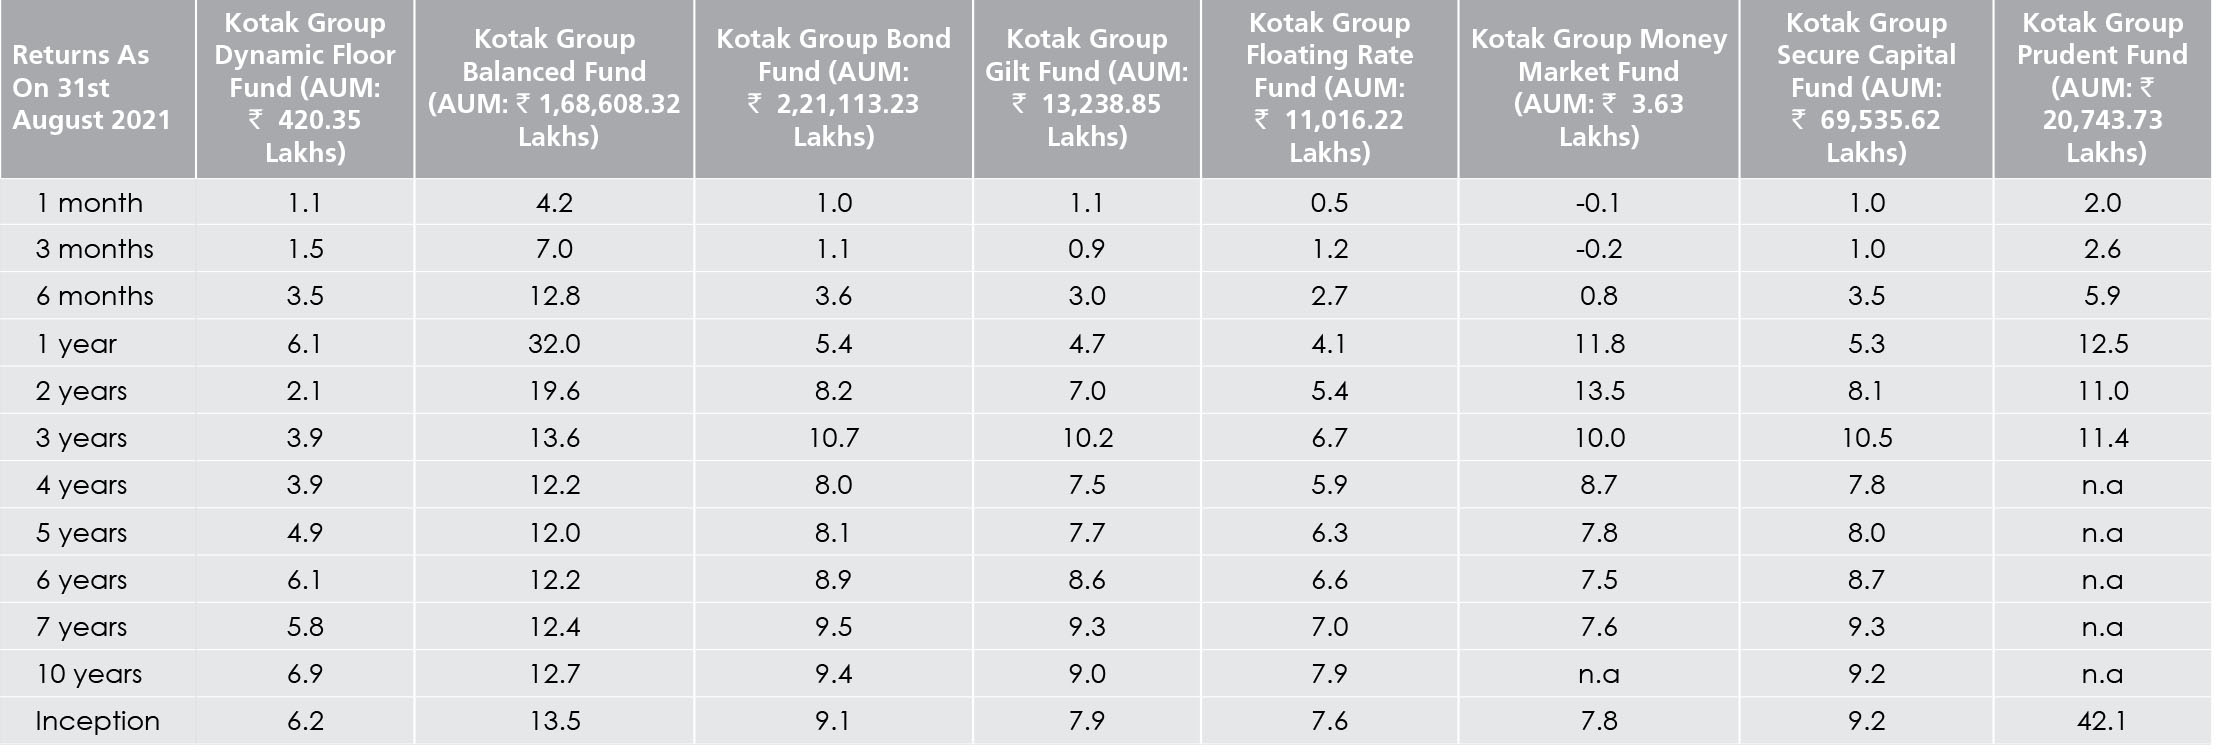  Performance of Kotak investments as on 31 Aug 2021 